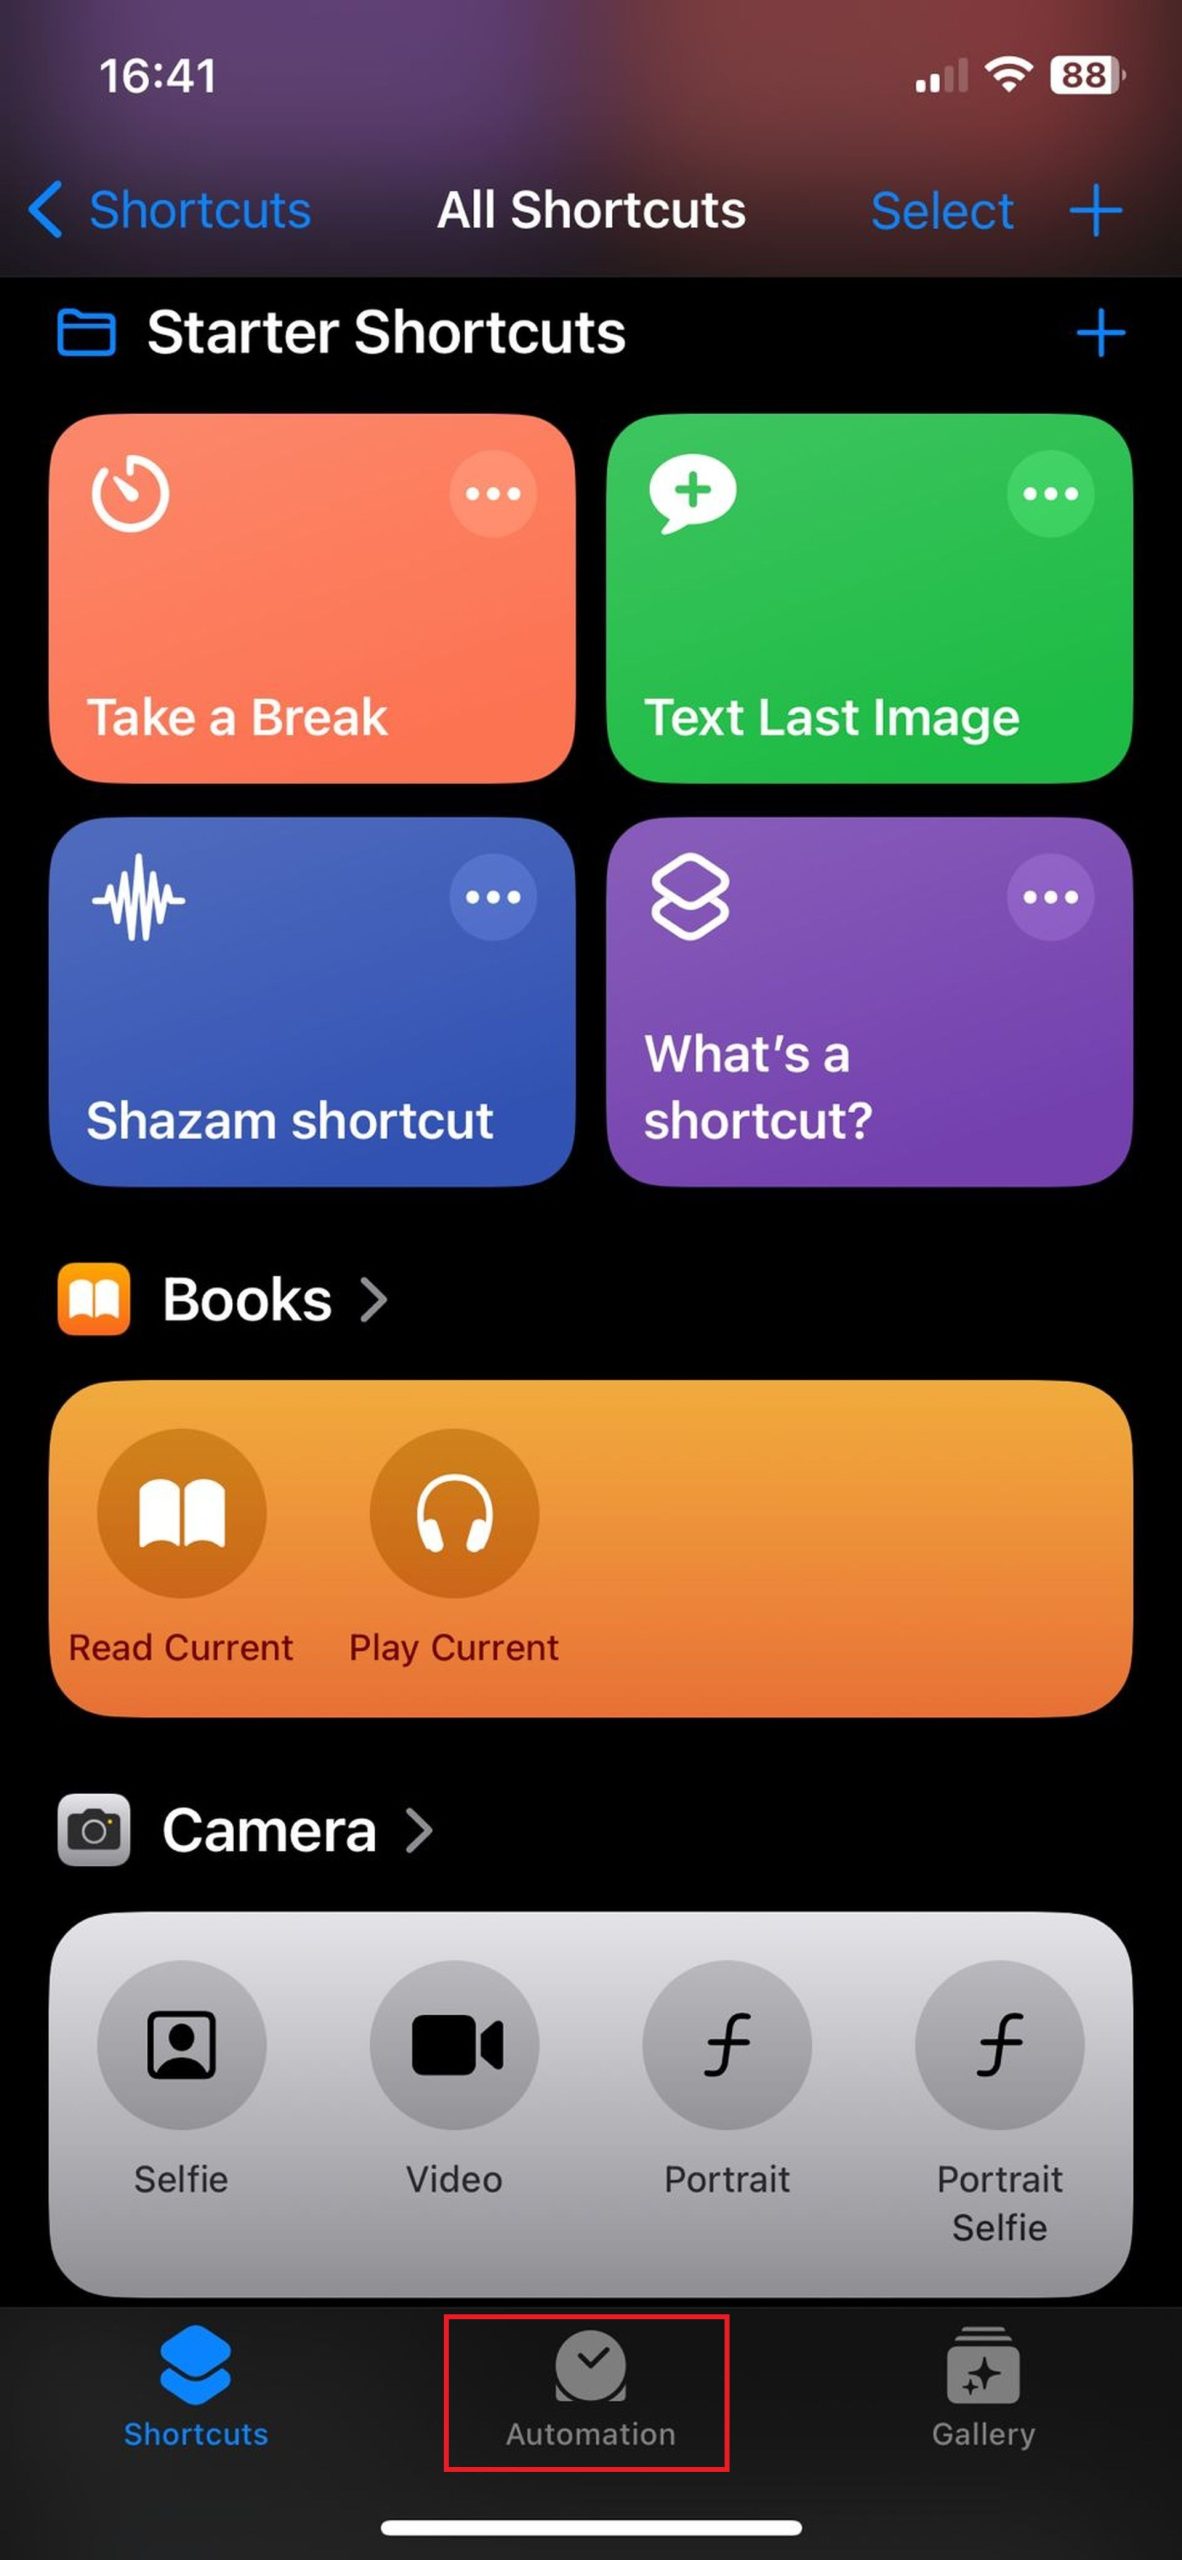 How to create an iPhone battery shortcut?